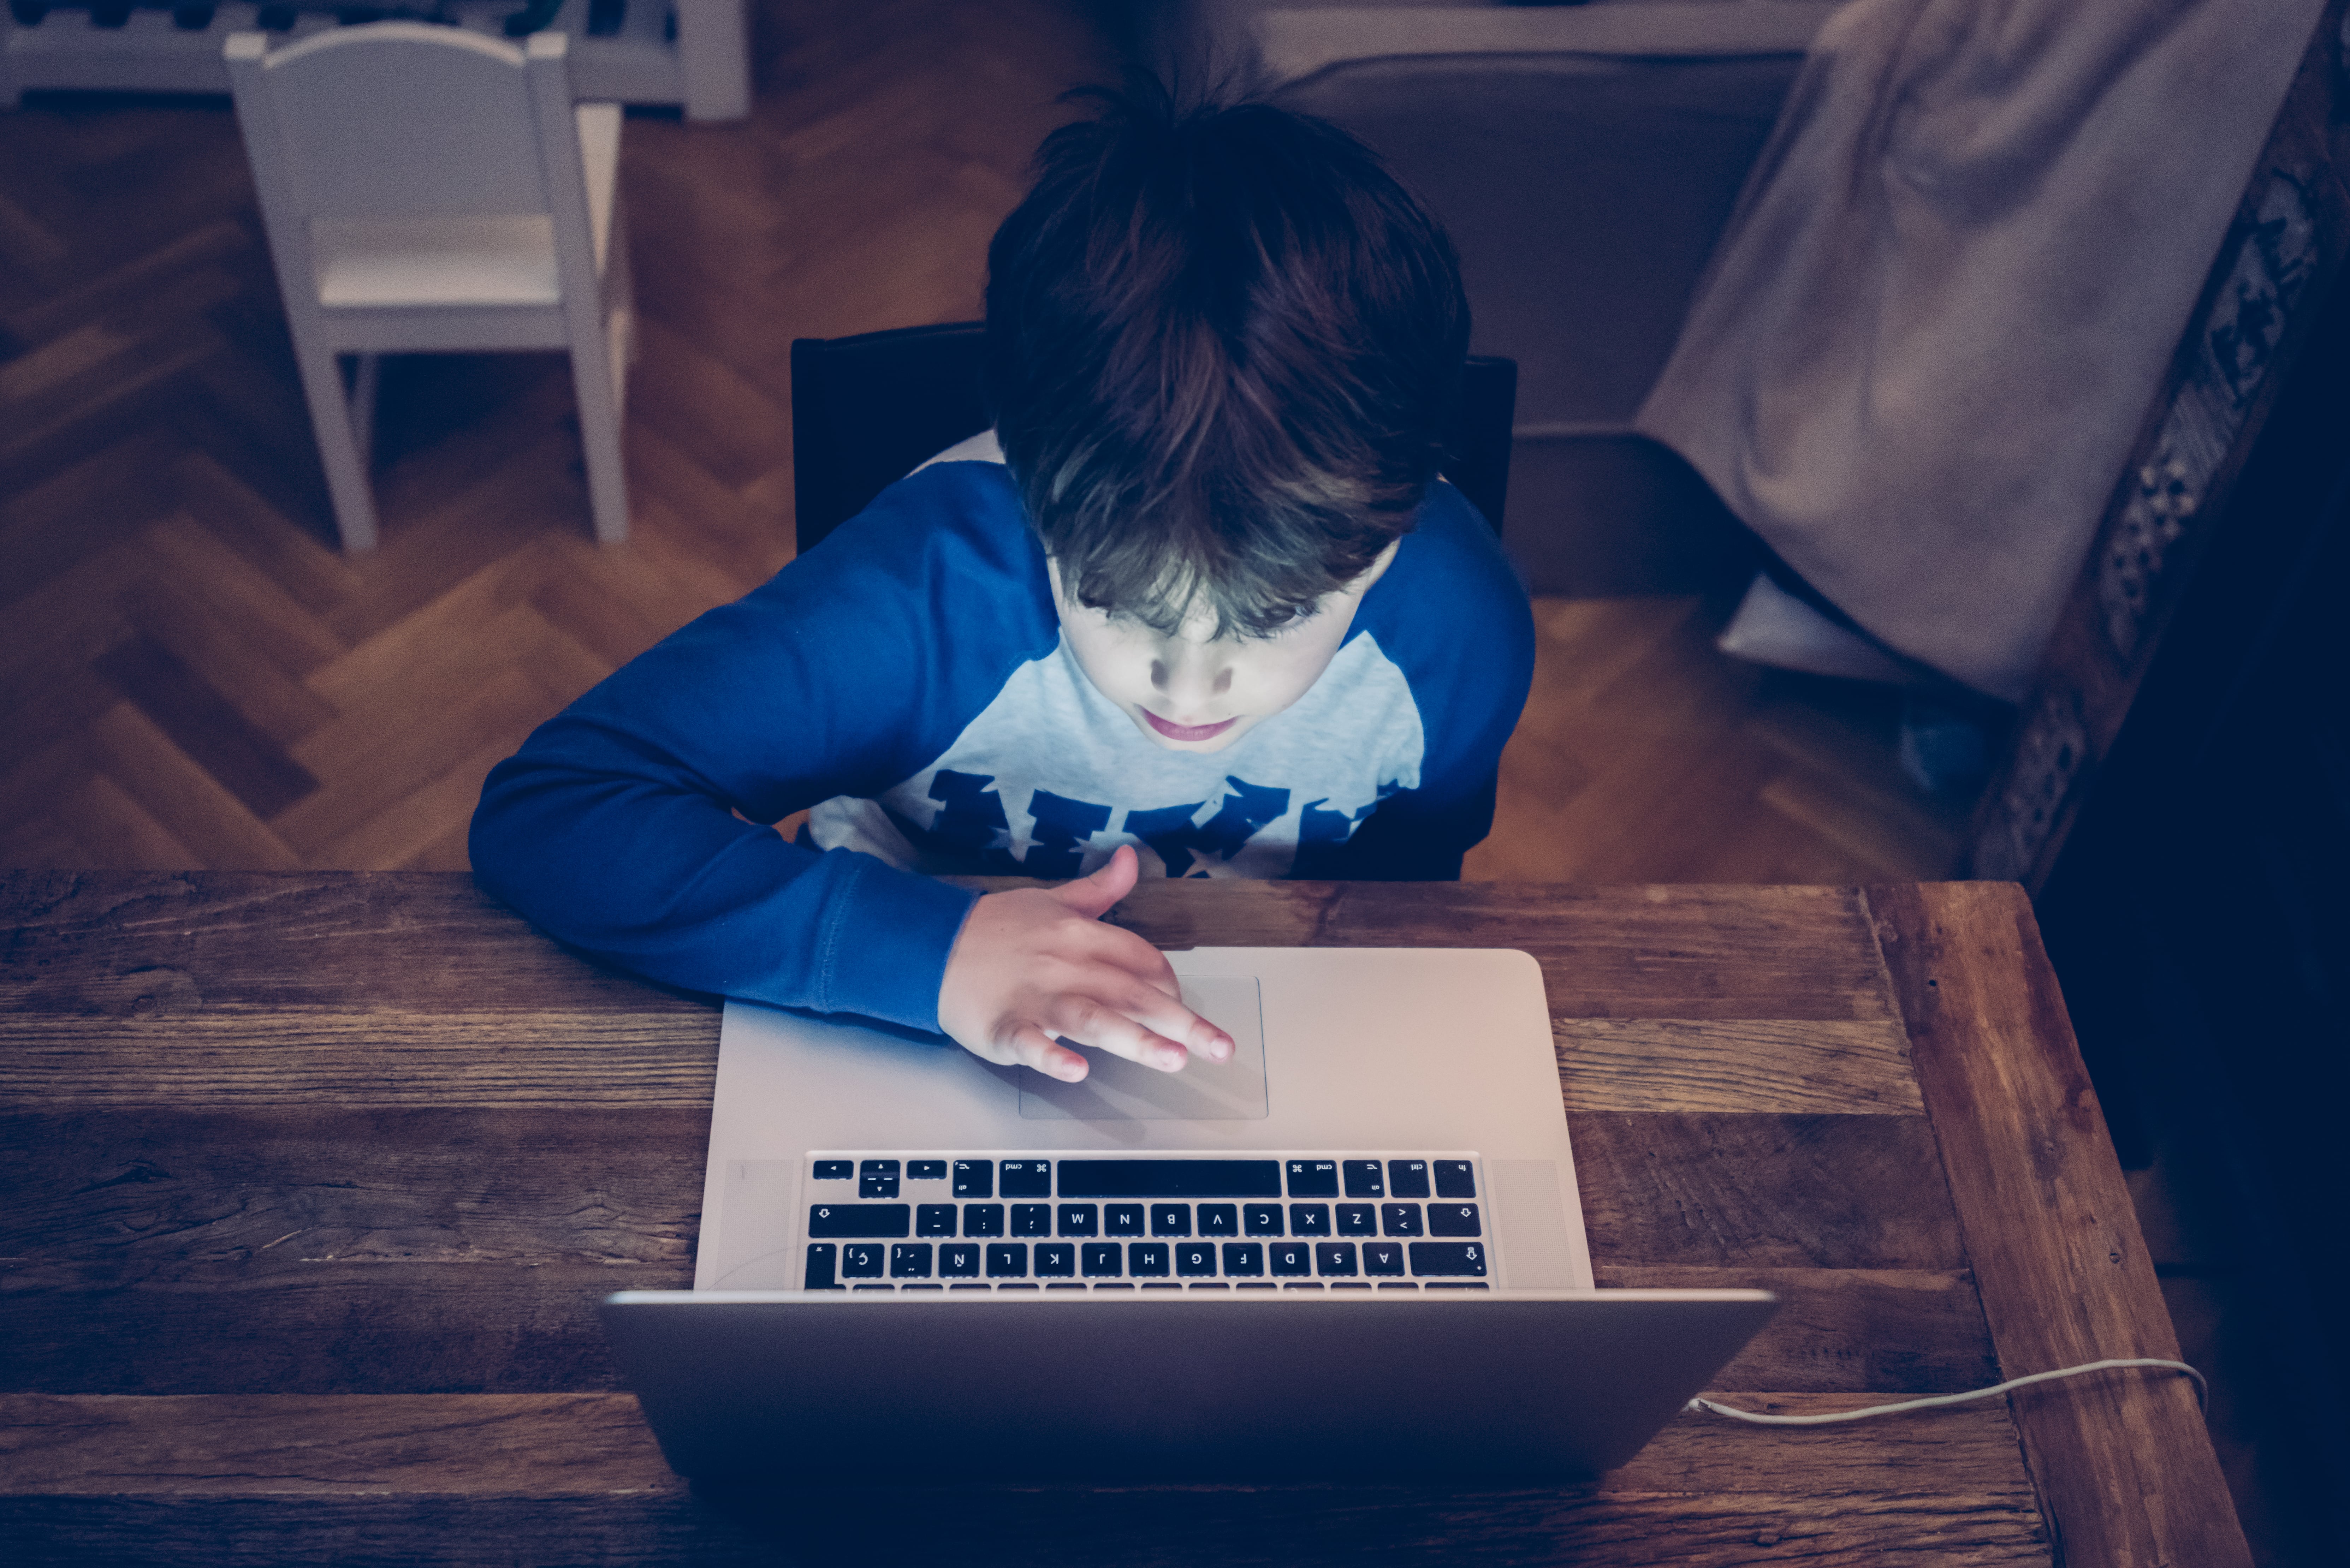 Why Is My Child Searching Up Inappropriate Things? | POPSUGAR Family